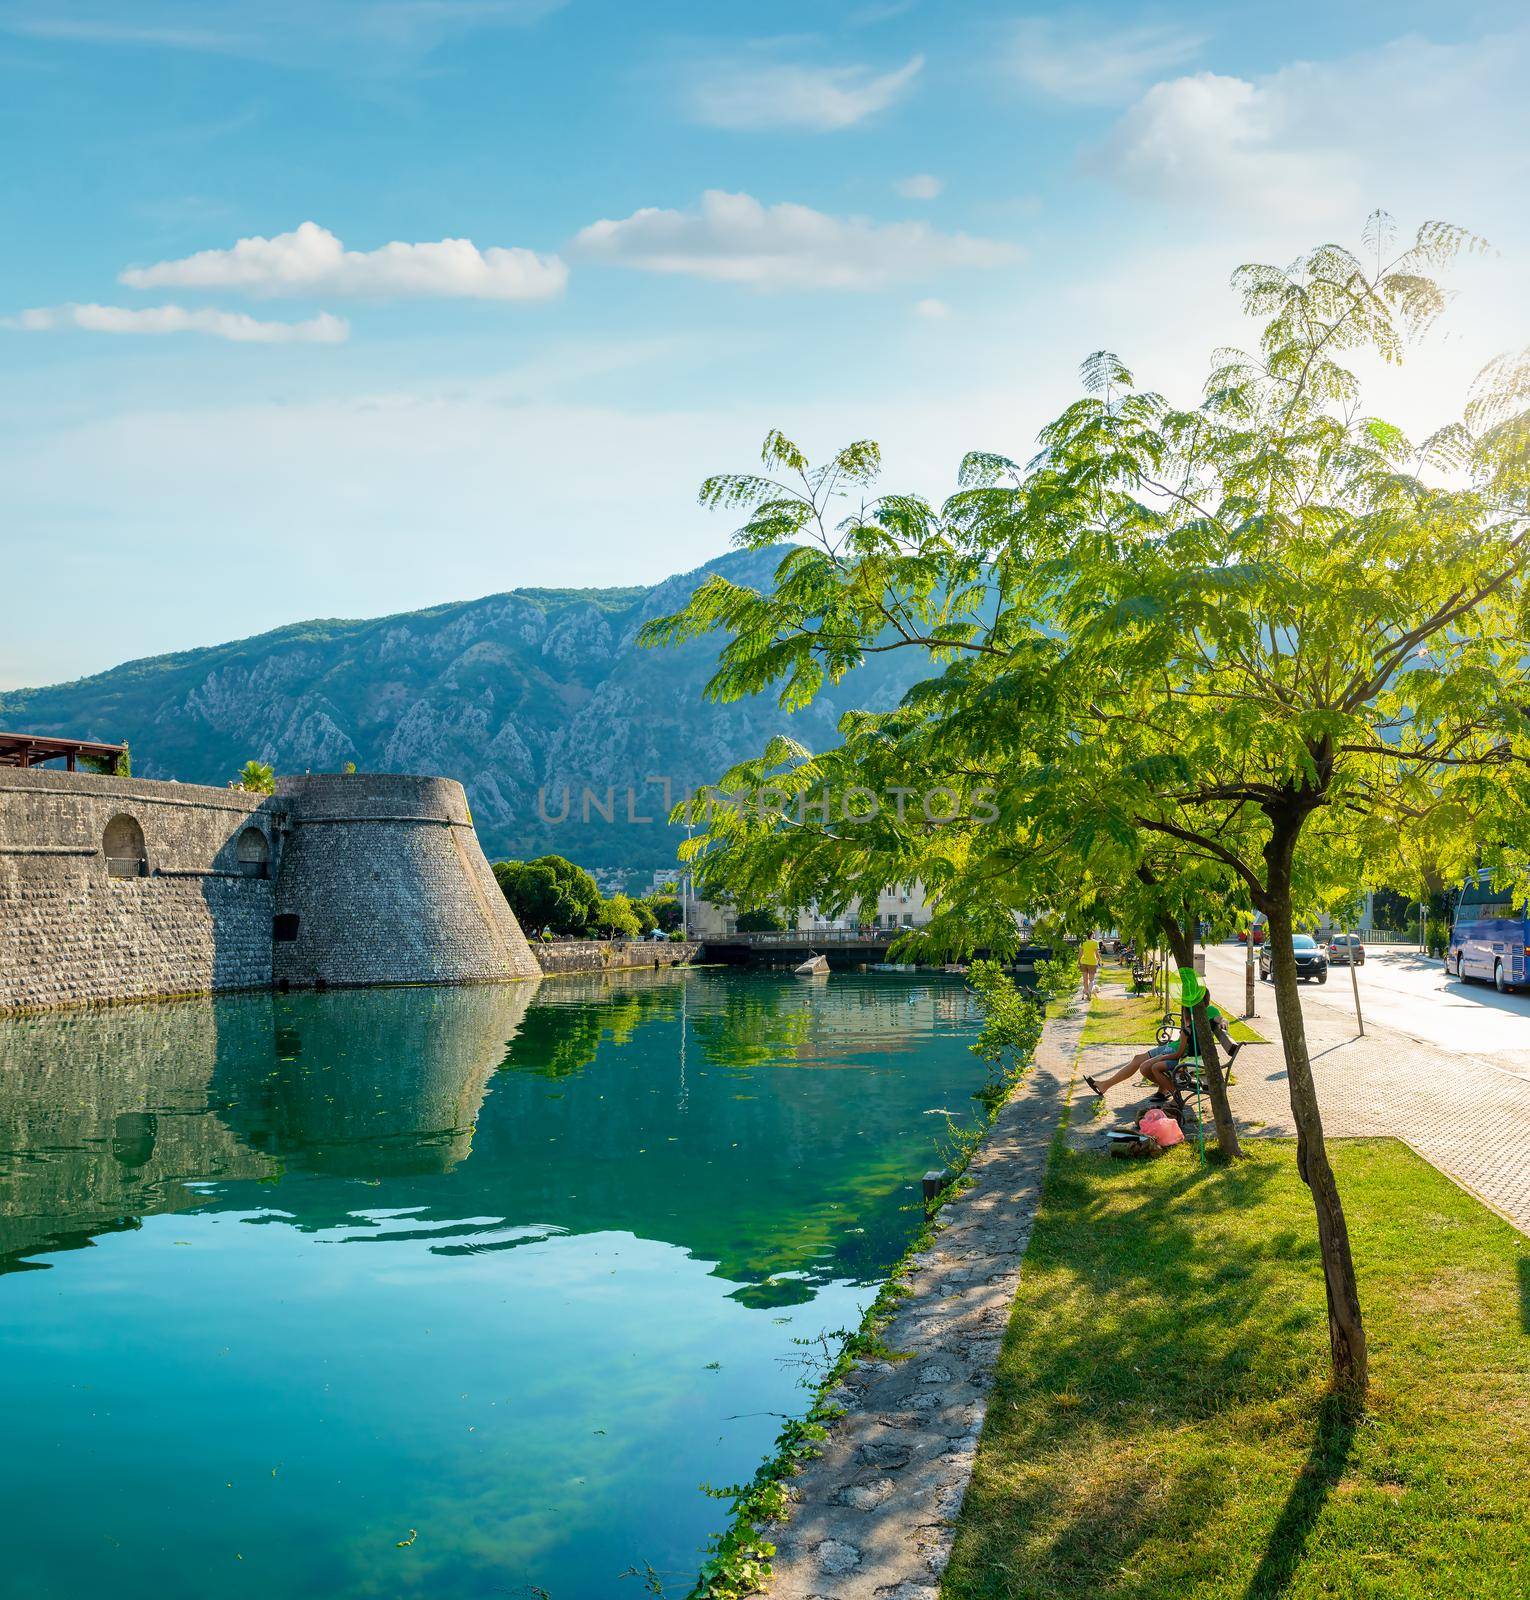 Kotor fortifications, in Montenegro by Givaga